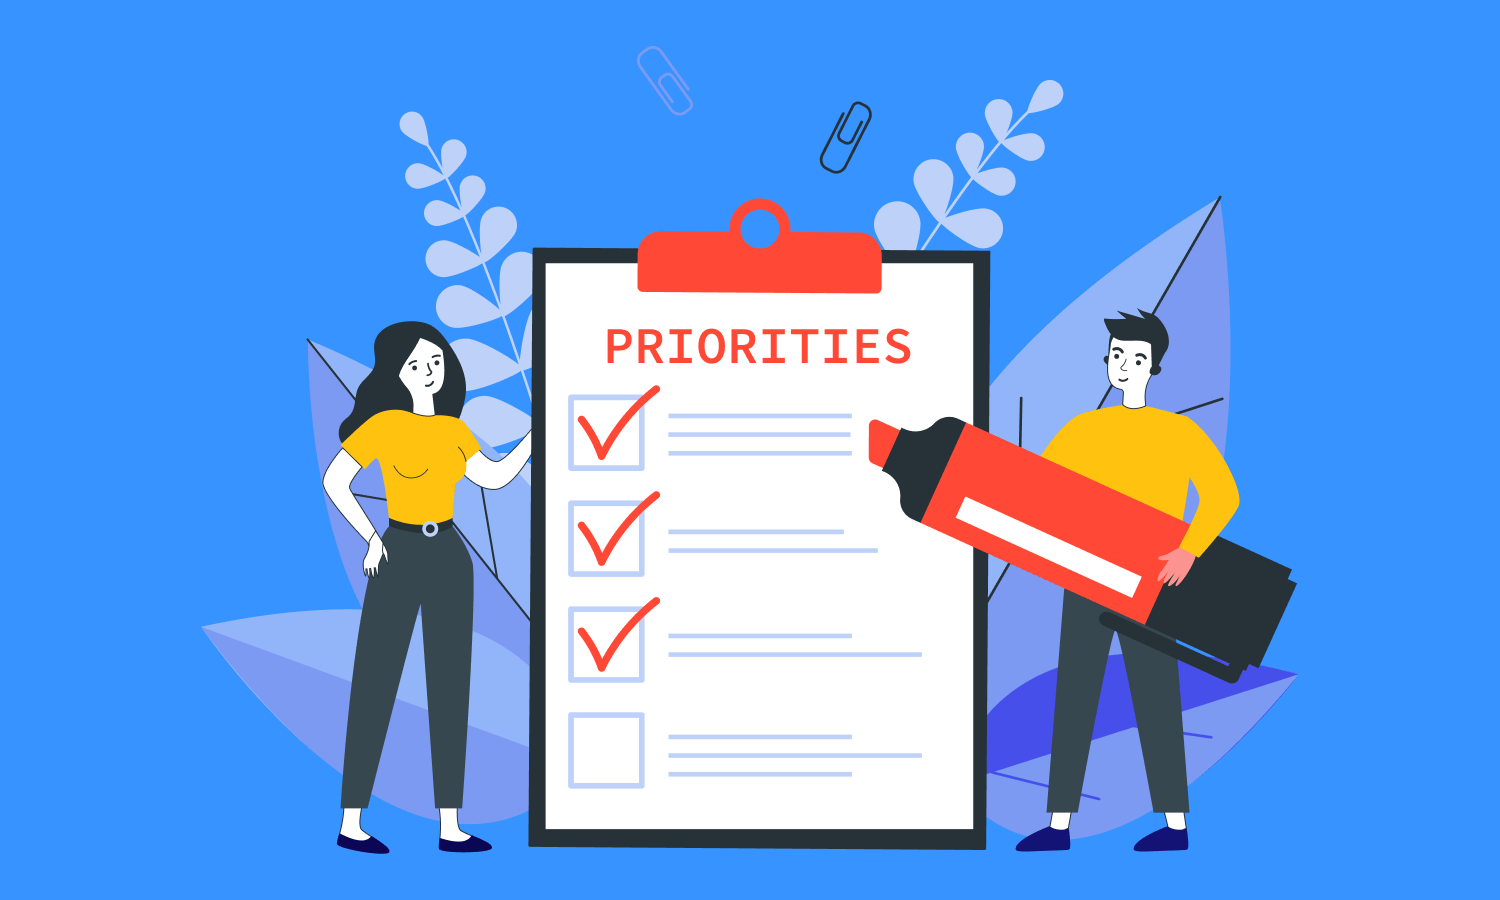 How to prioritize our goals and tasks